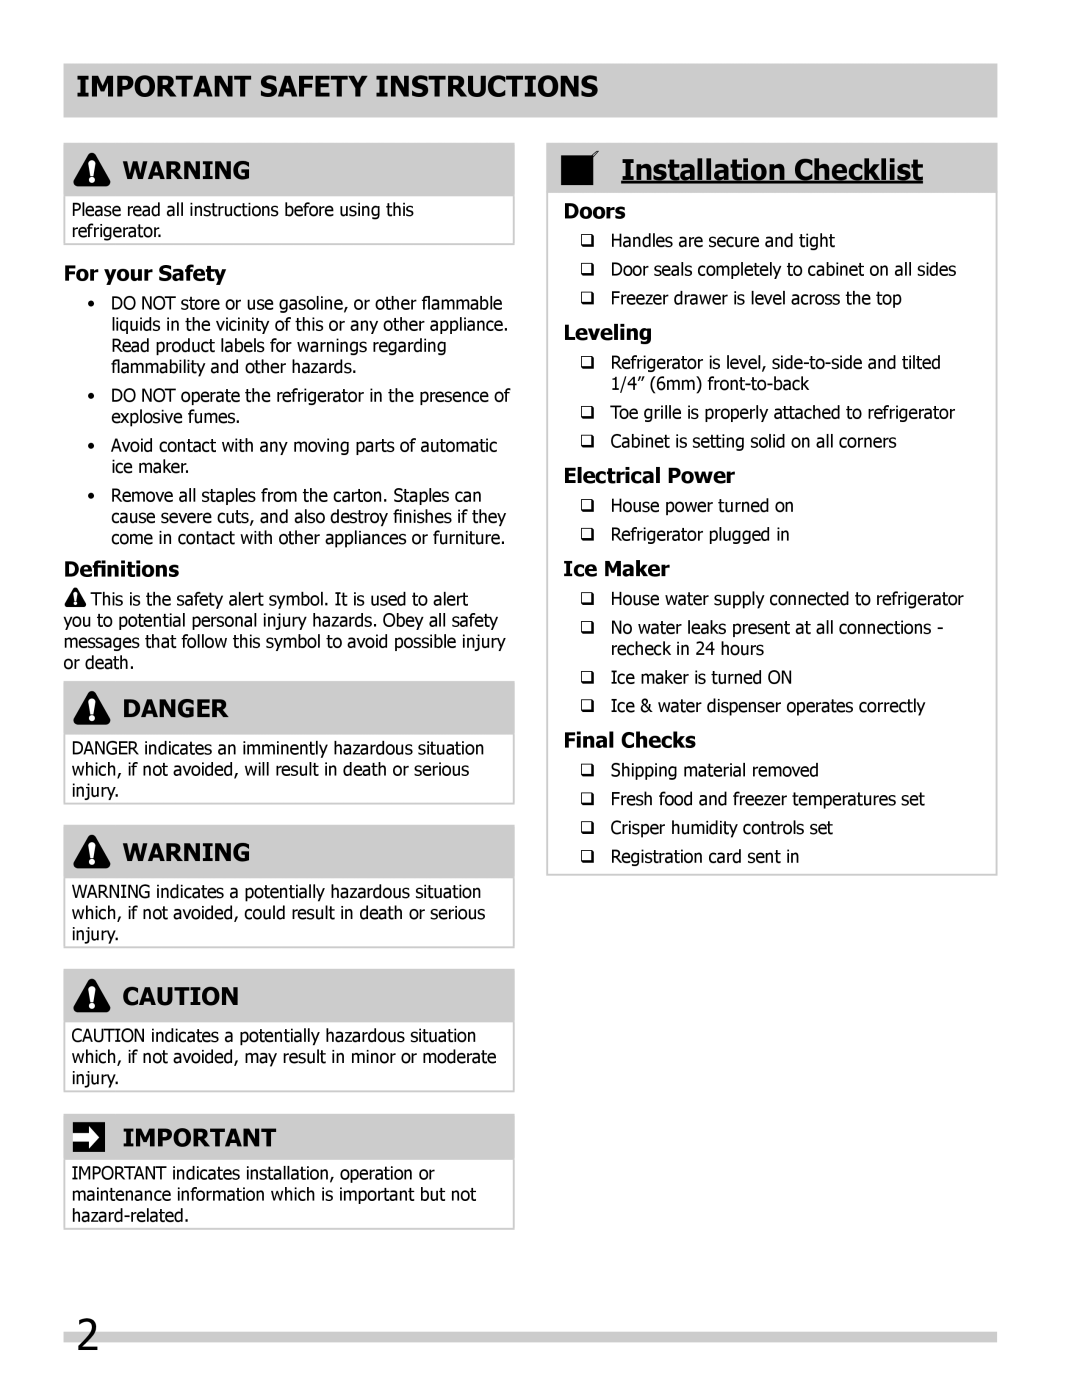 Frigidaire 242046800 Important Safety Instructions, Installation Checklist, Danger, For your Safety, Definitions, Doors 